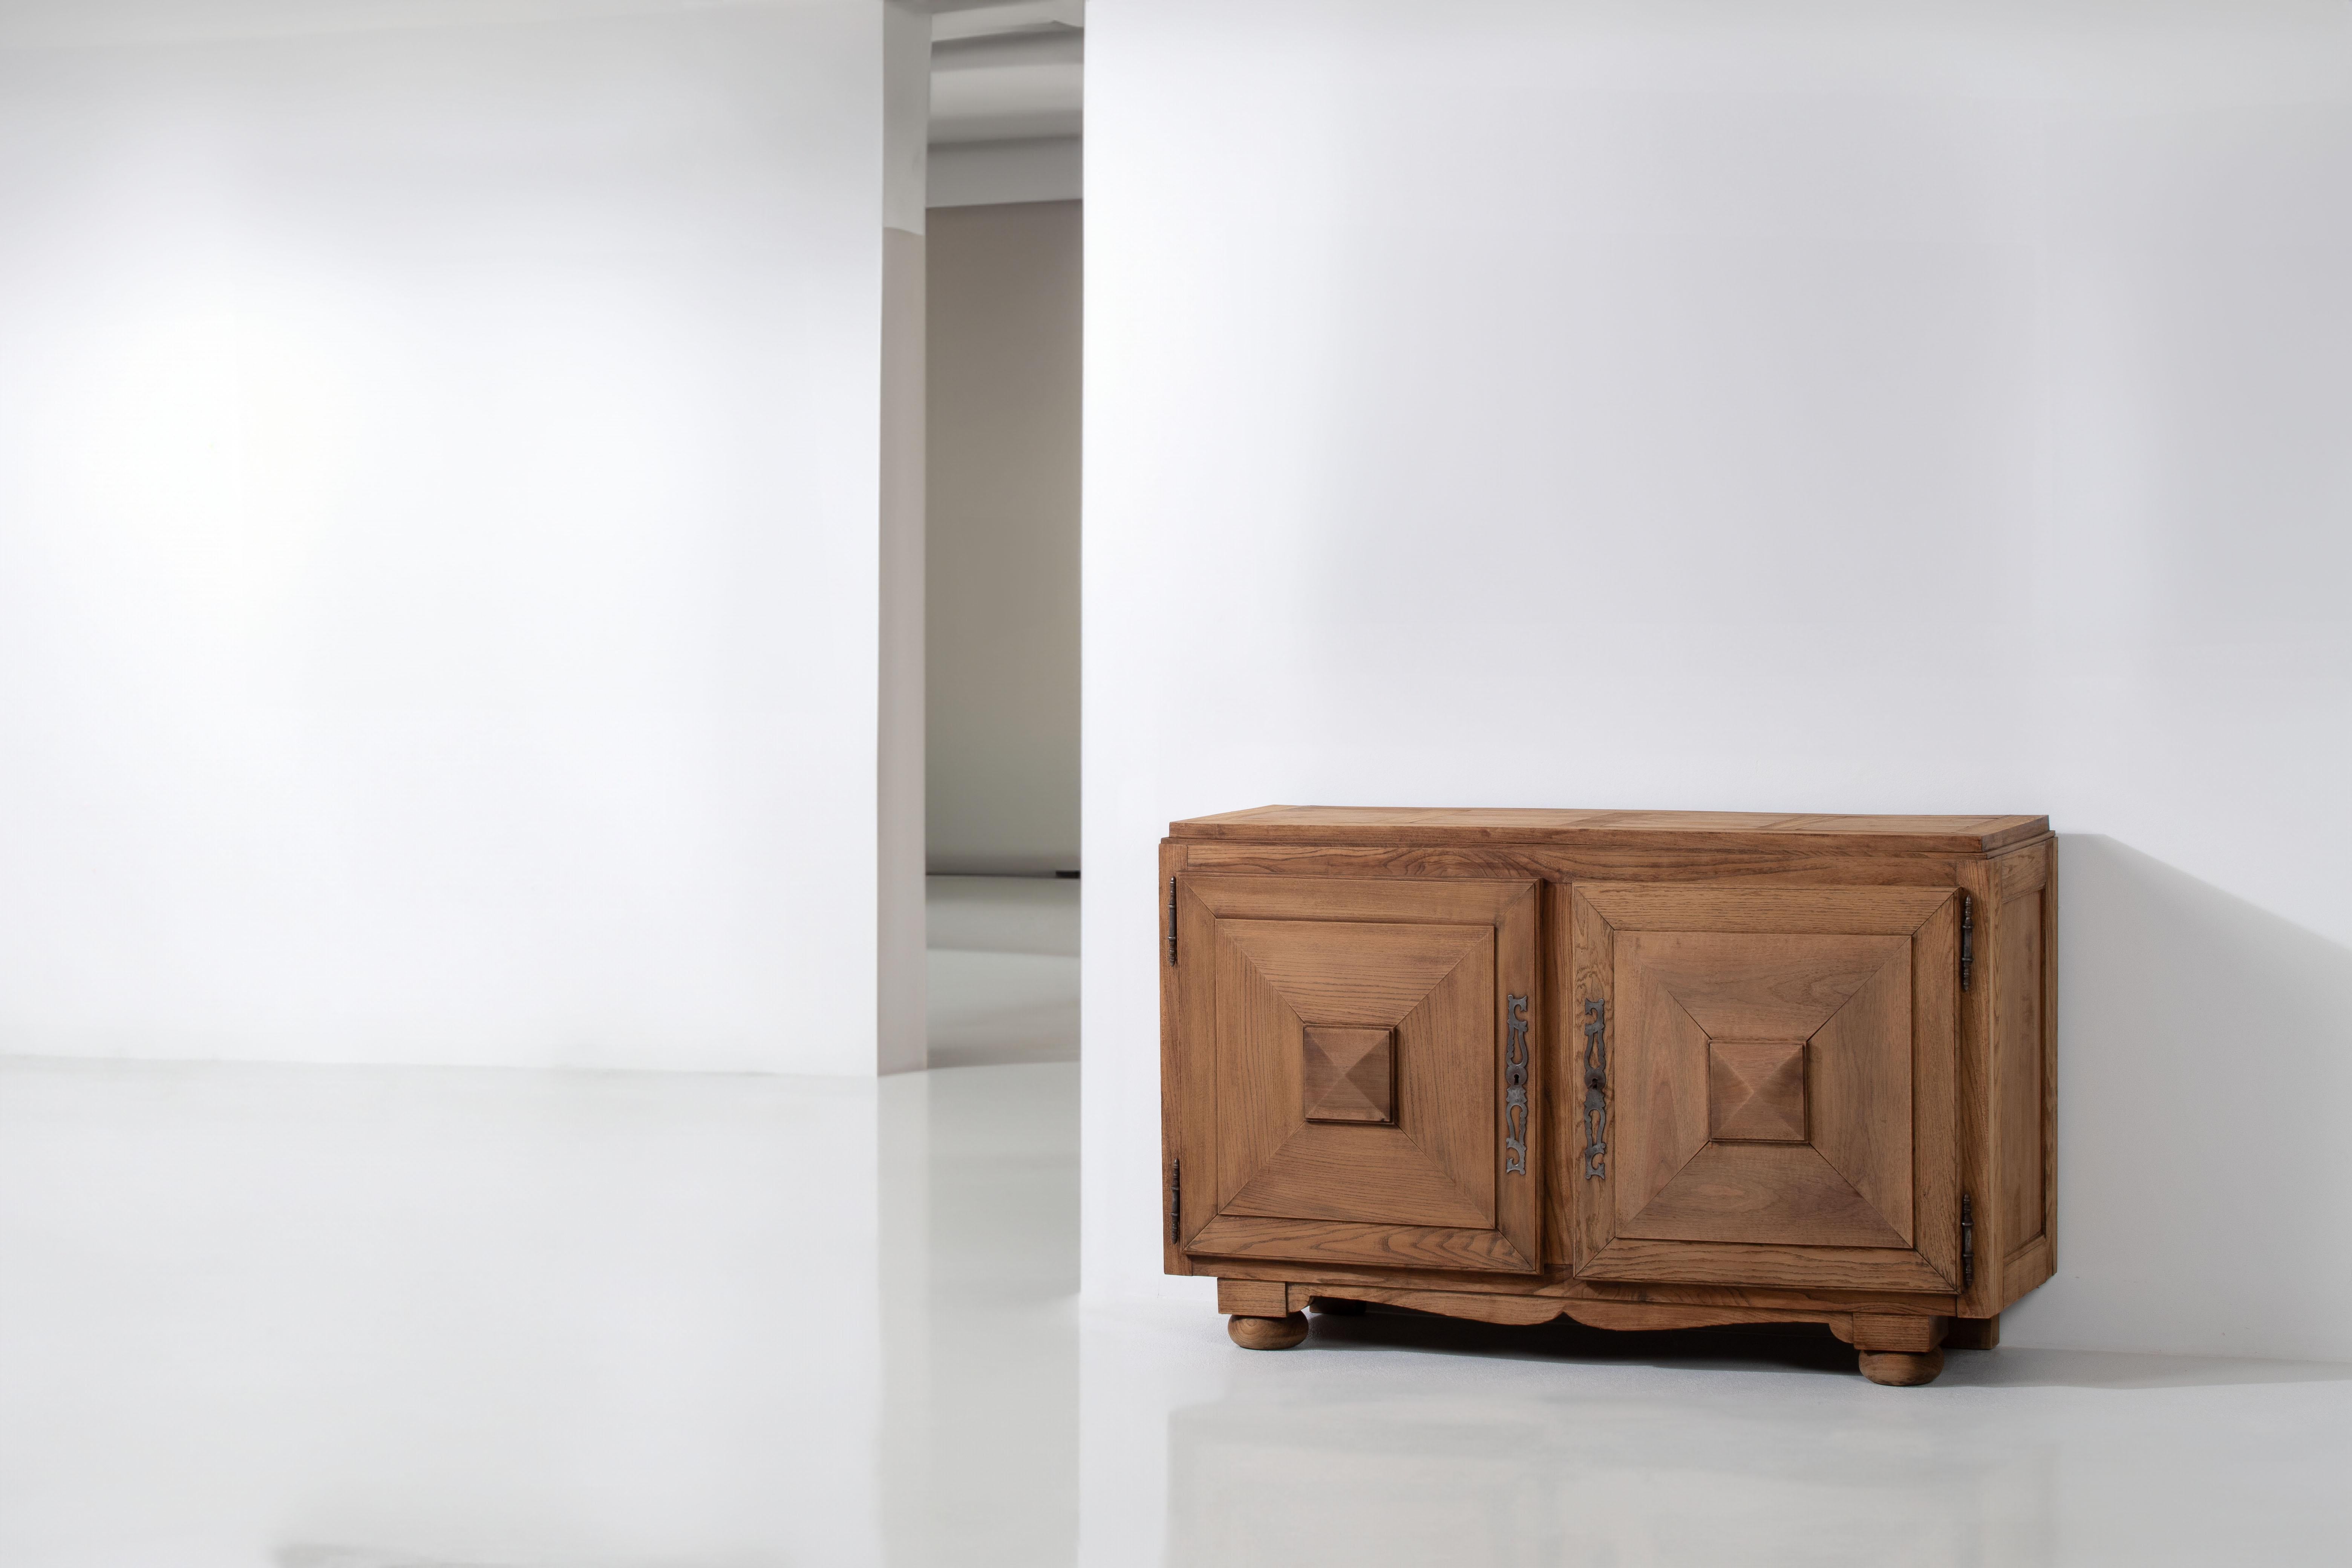 Step into the timeless elegance of 1930s France with this exquisite oak cabinet. Crafted with care from solid oak, this piece showcases the refined design sensibilities of the era.

The cabinet features two doors adorned with graphic designs, a